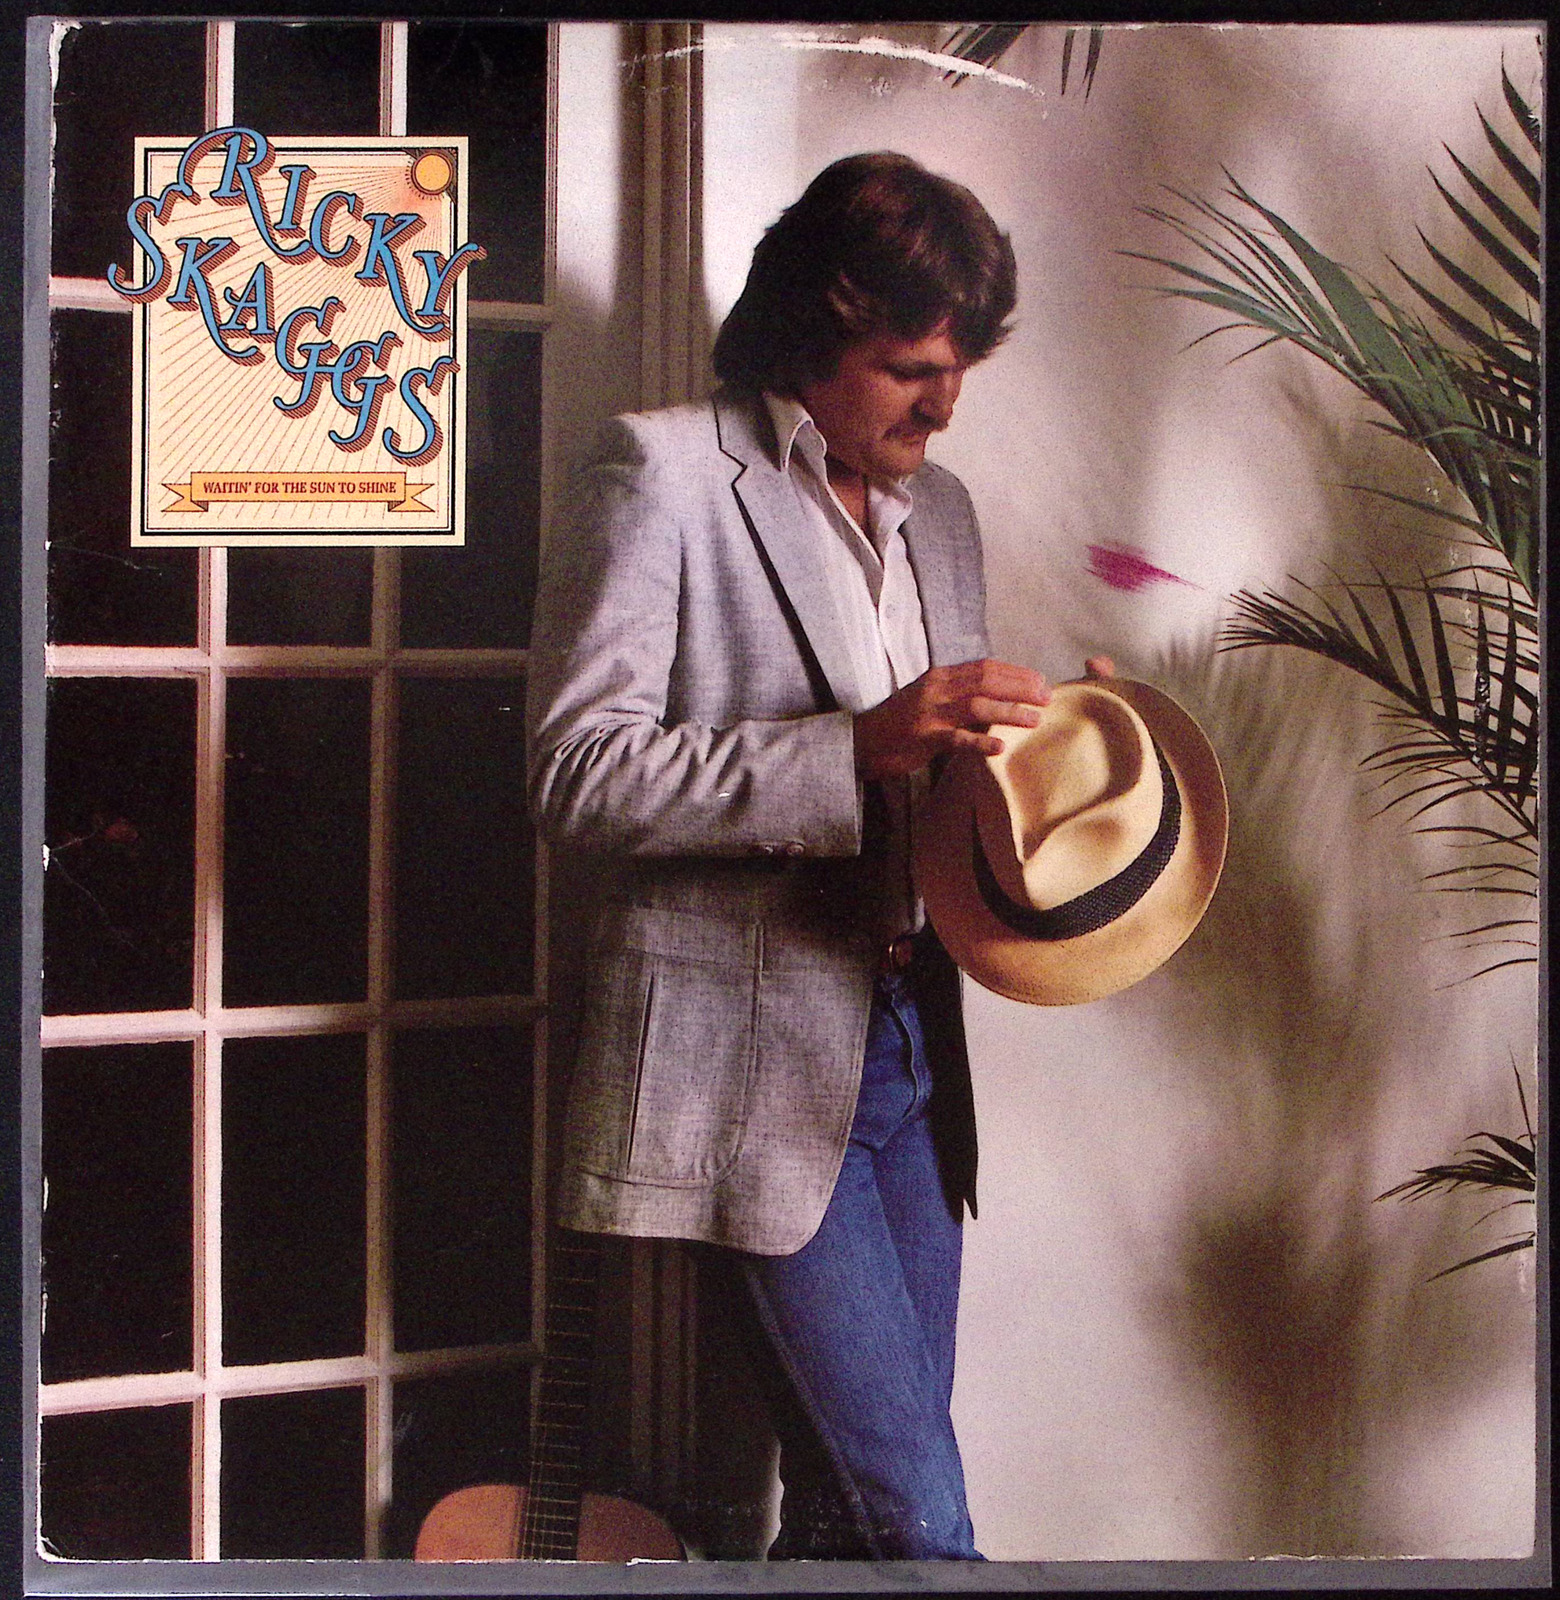 RICKY SKAGGS WAITIN\' FOR THE SUN TO SHINE EPIC RECORDS VINYL LP 146-90 W